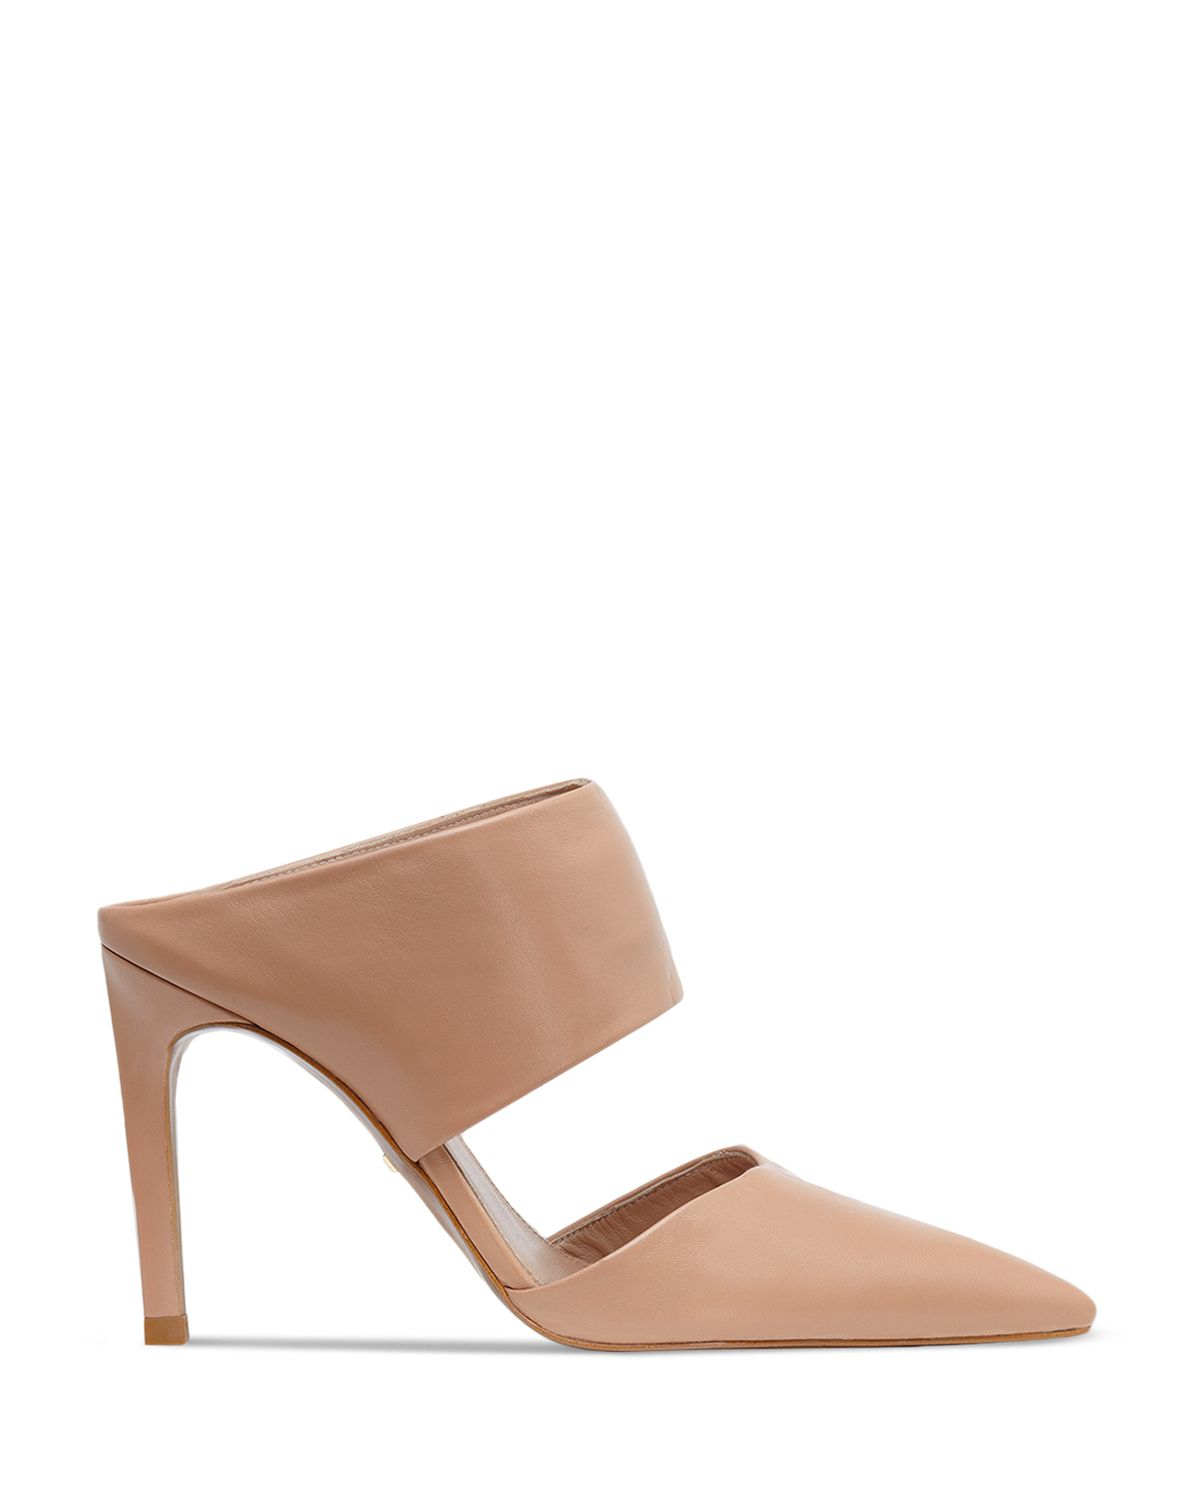 Whistles Mule Pumps - Tilla Pointed Toe in Natural | Lyst